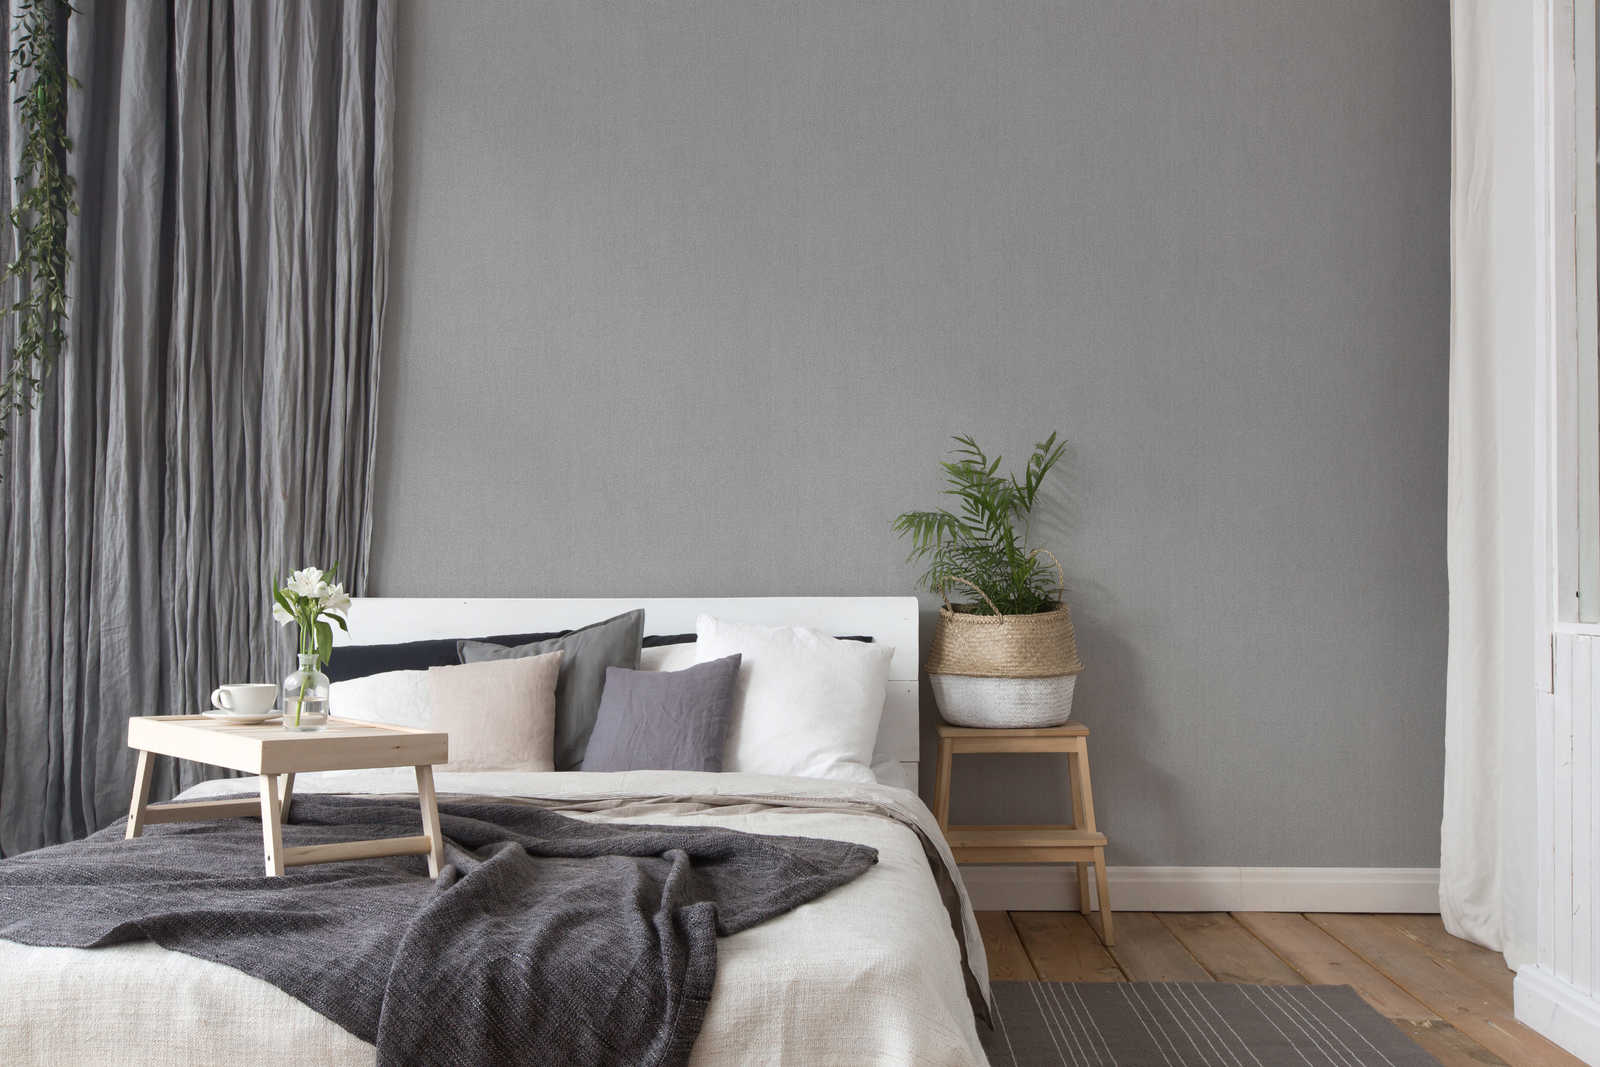             Wallpaper plain with texture details, Scandi styles - grey
        